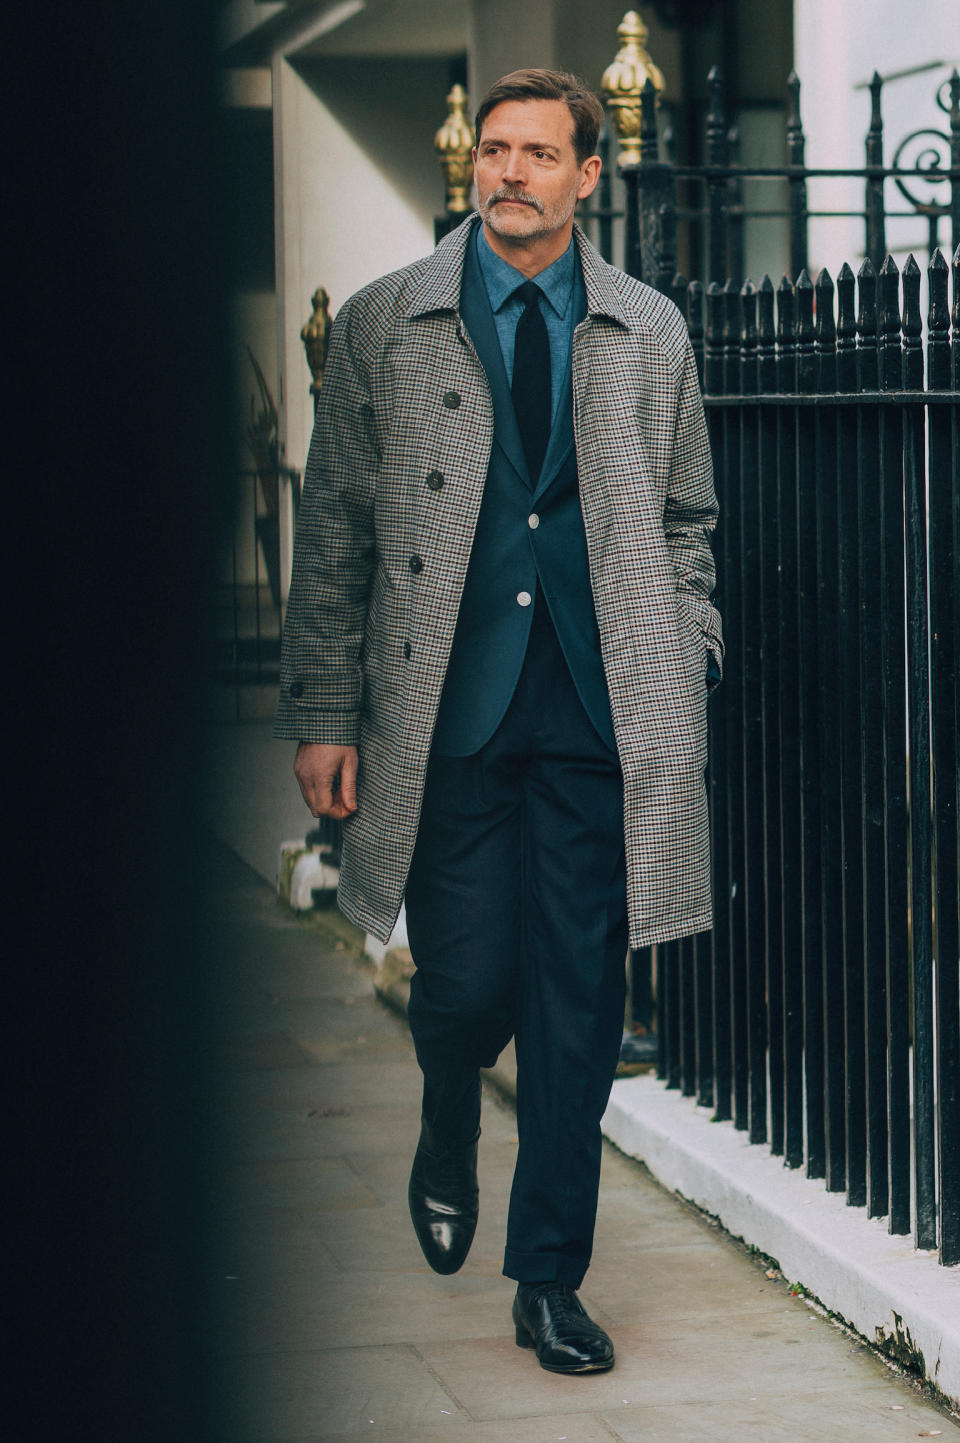 Patrick Grant on the streets of London wearing clothing from his new collection at Frasers.